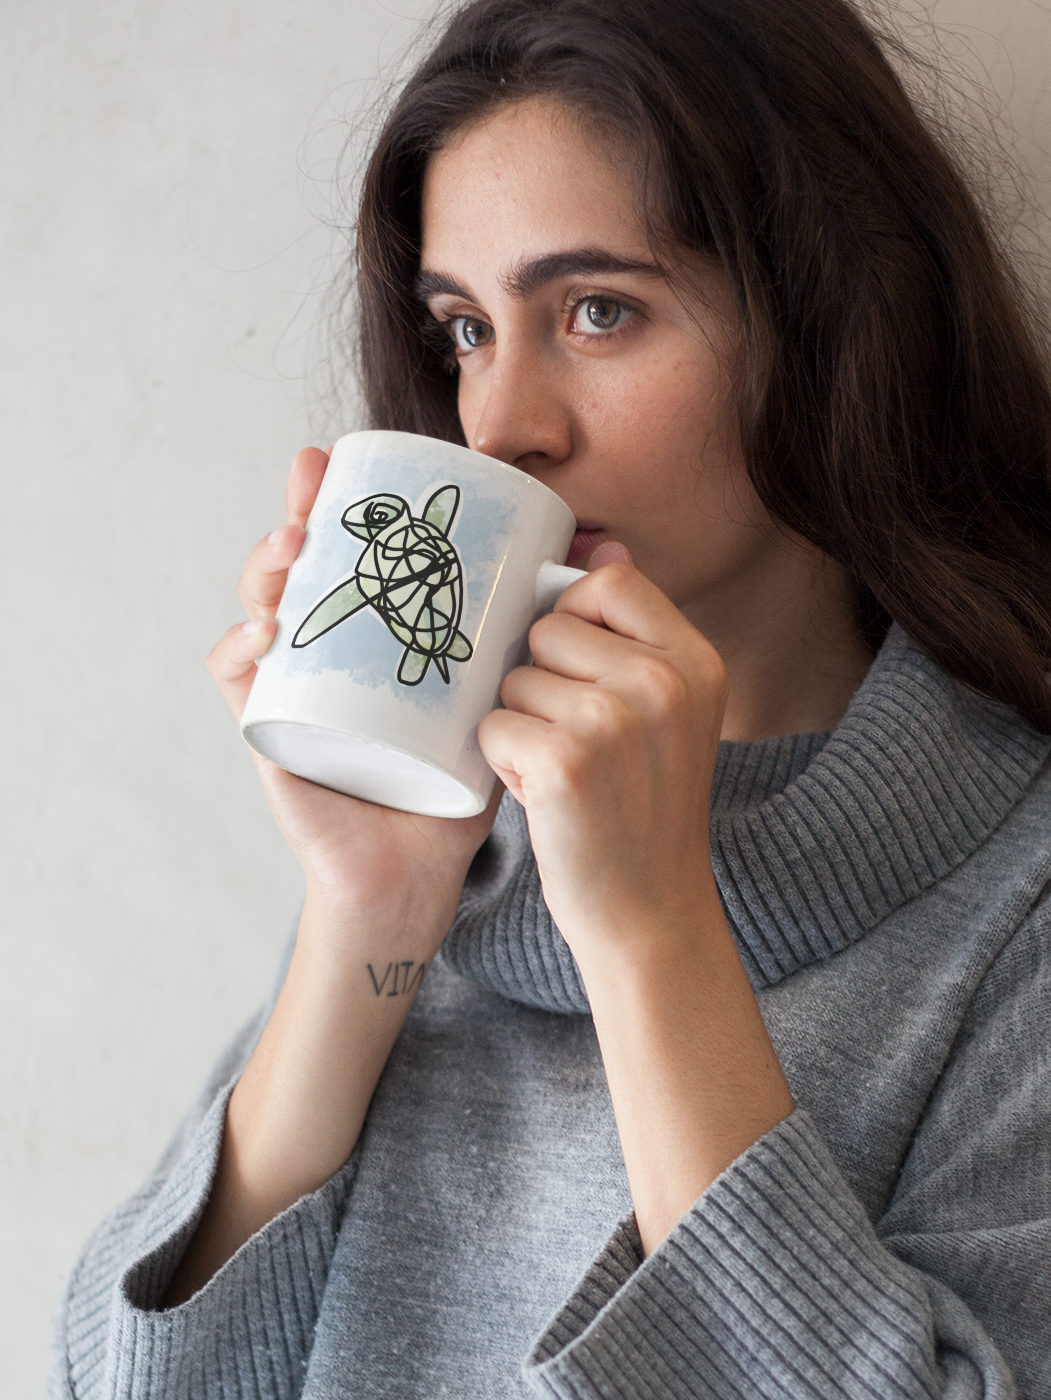 A young woman holding a Myrtle the Sea Turtle illustrated ceramic coffee mug by Hector and Bone